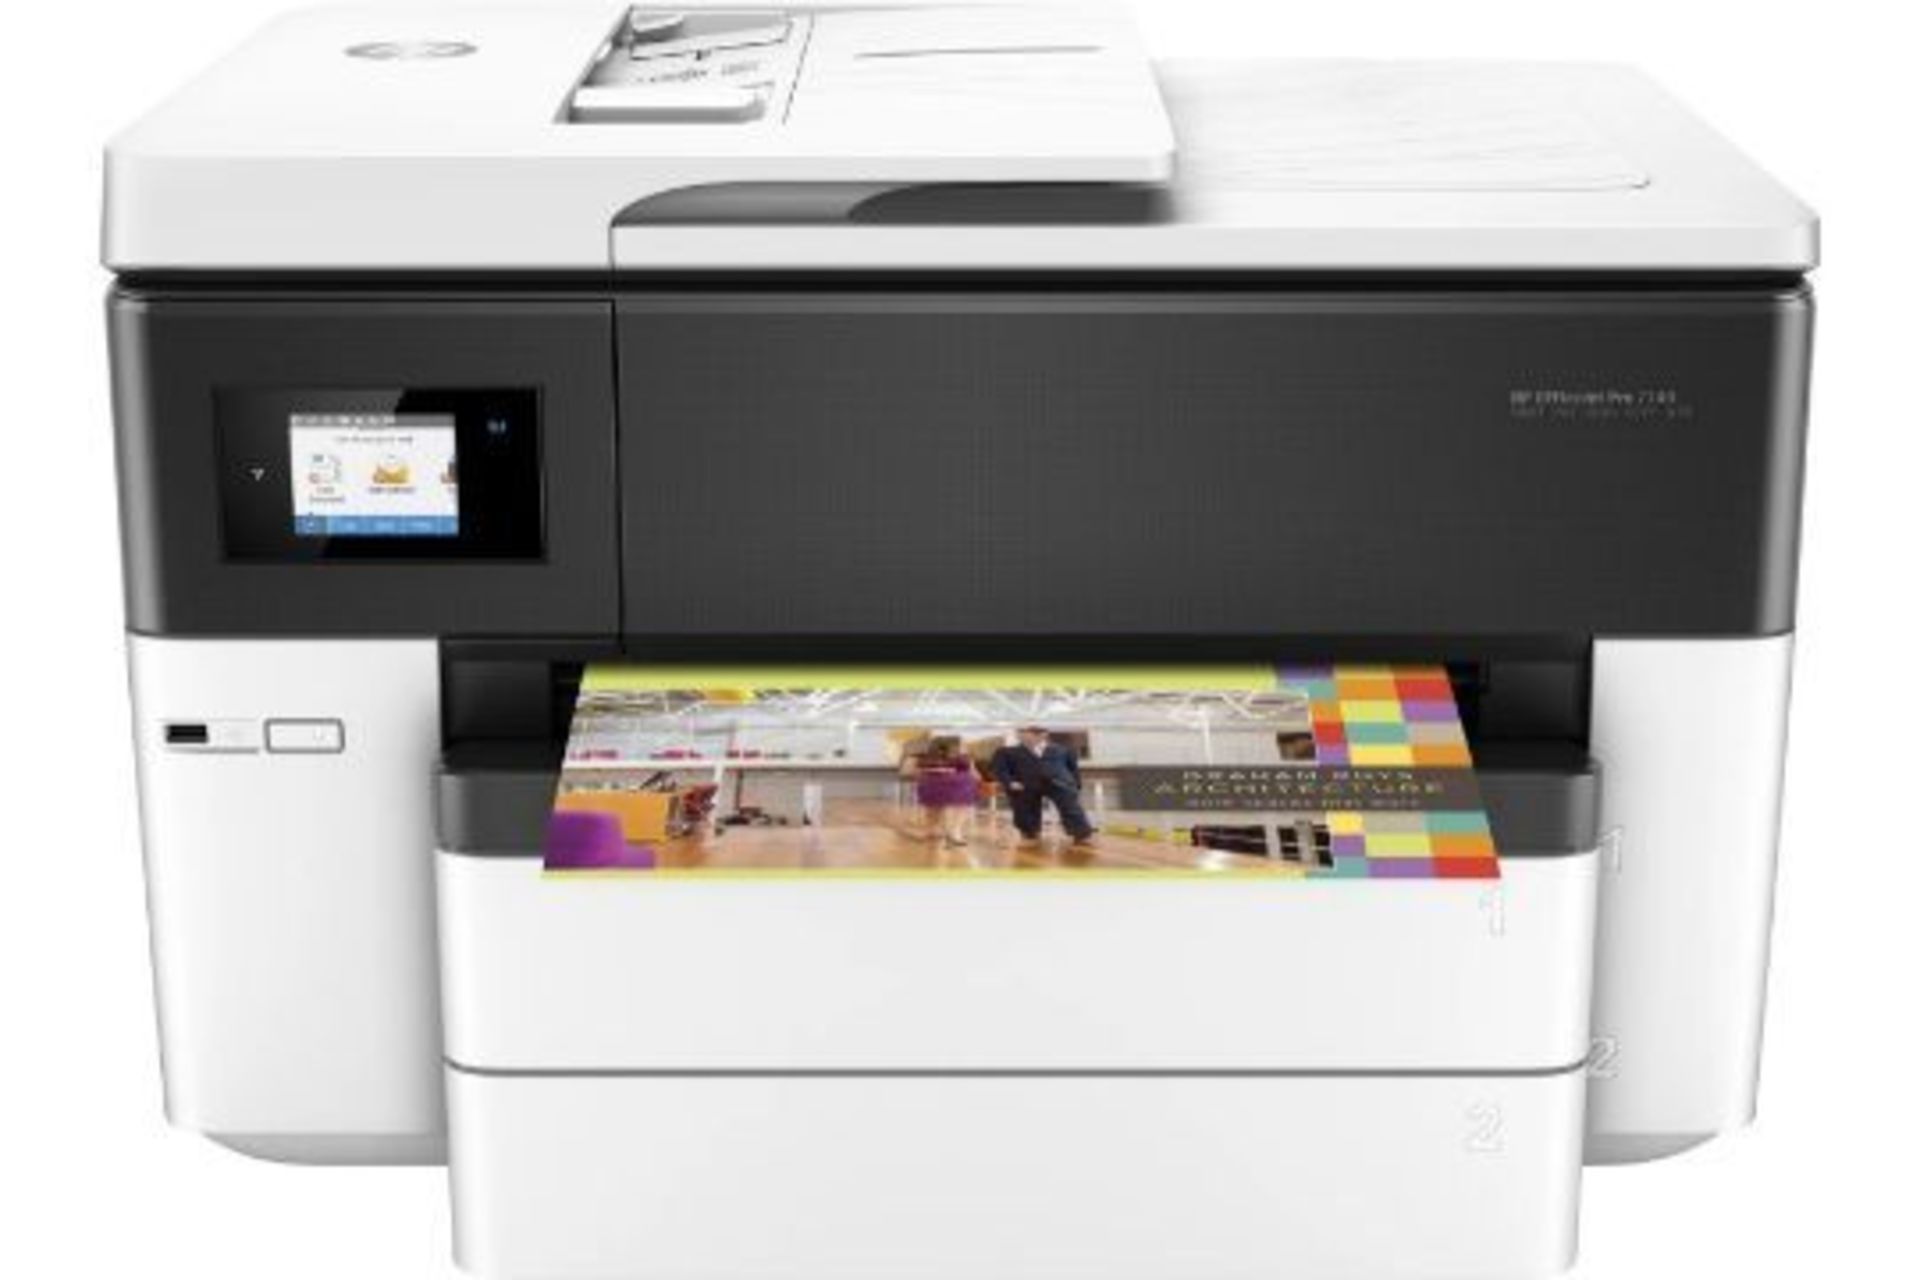 HP OfficeJet Pro 7740 A3 Wireless All-in-One Printer. - PCKBW. RRP £299.99. Automatic two-sided